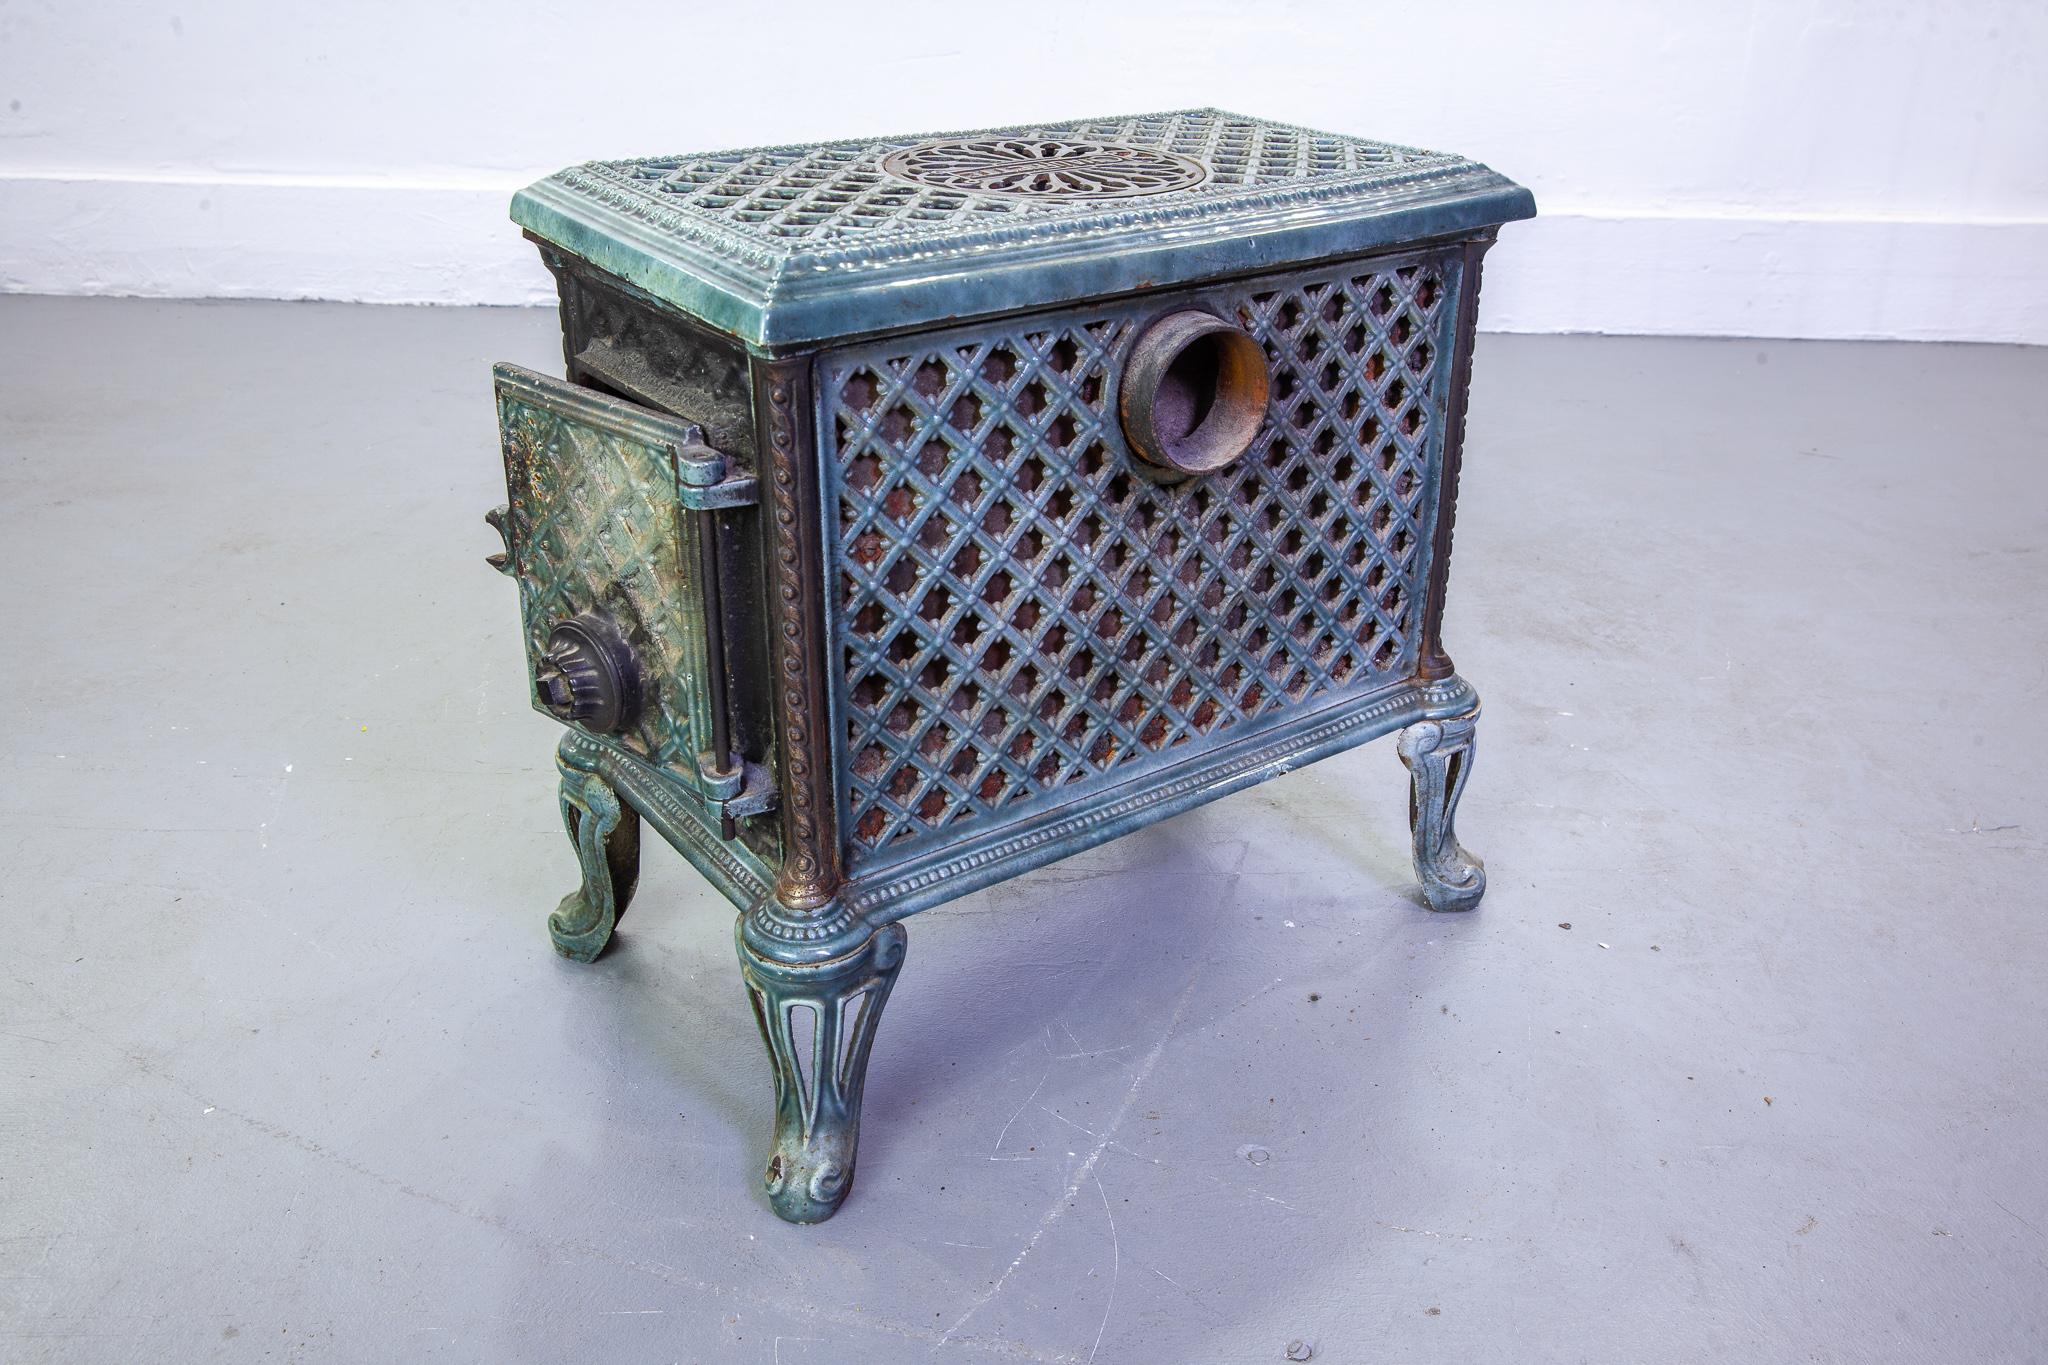 20th Century French Godin Chaufette Wood Stove in Vintage Green Cast Iron 1